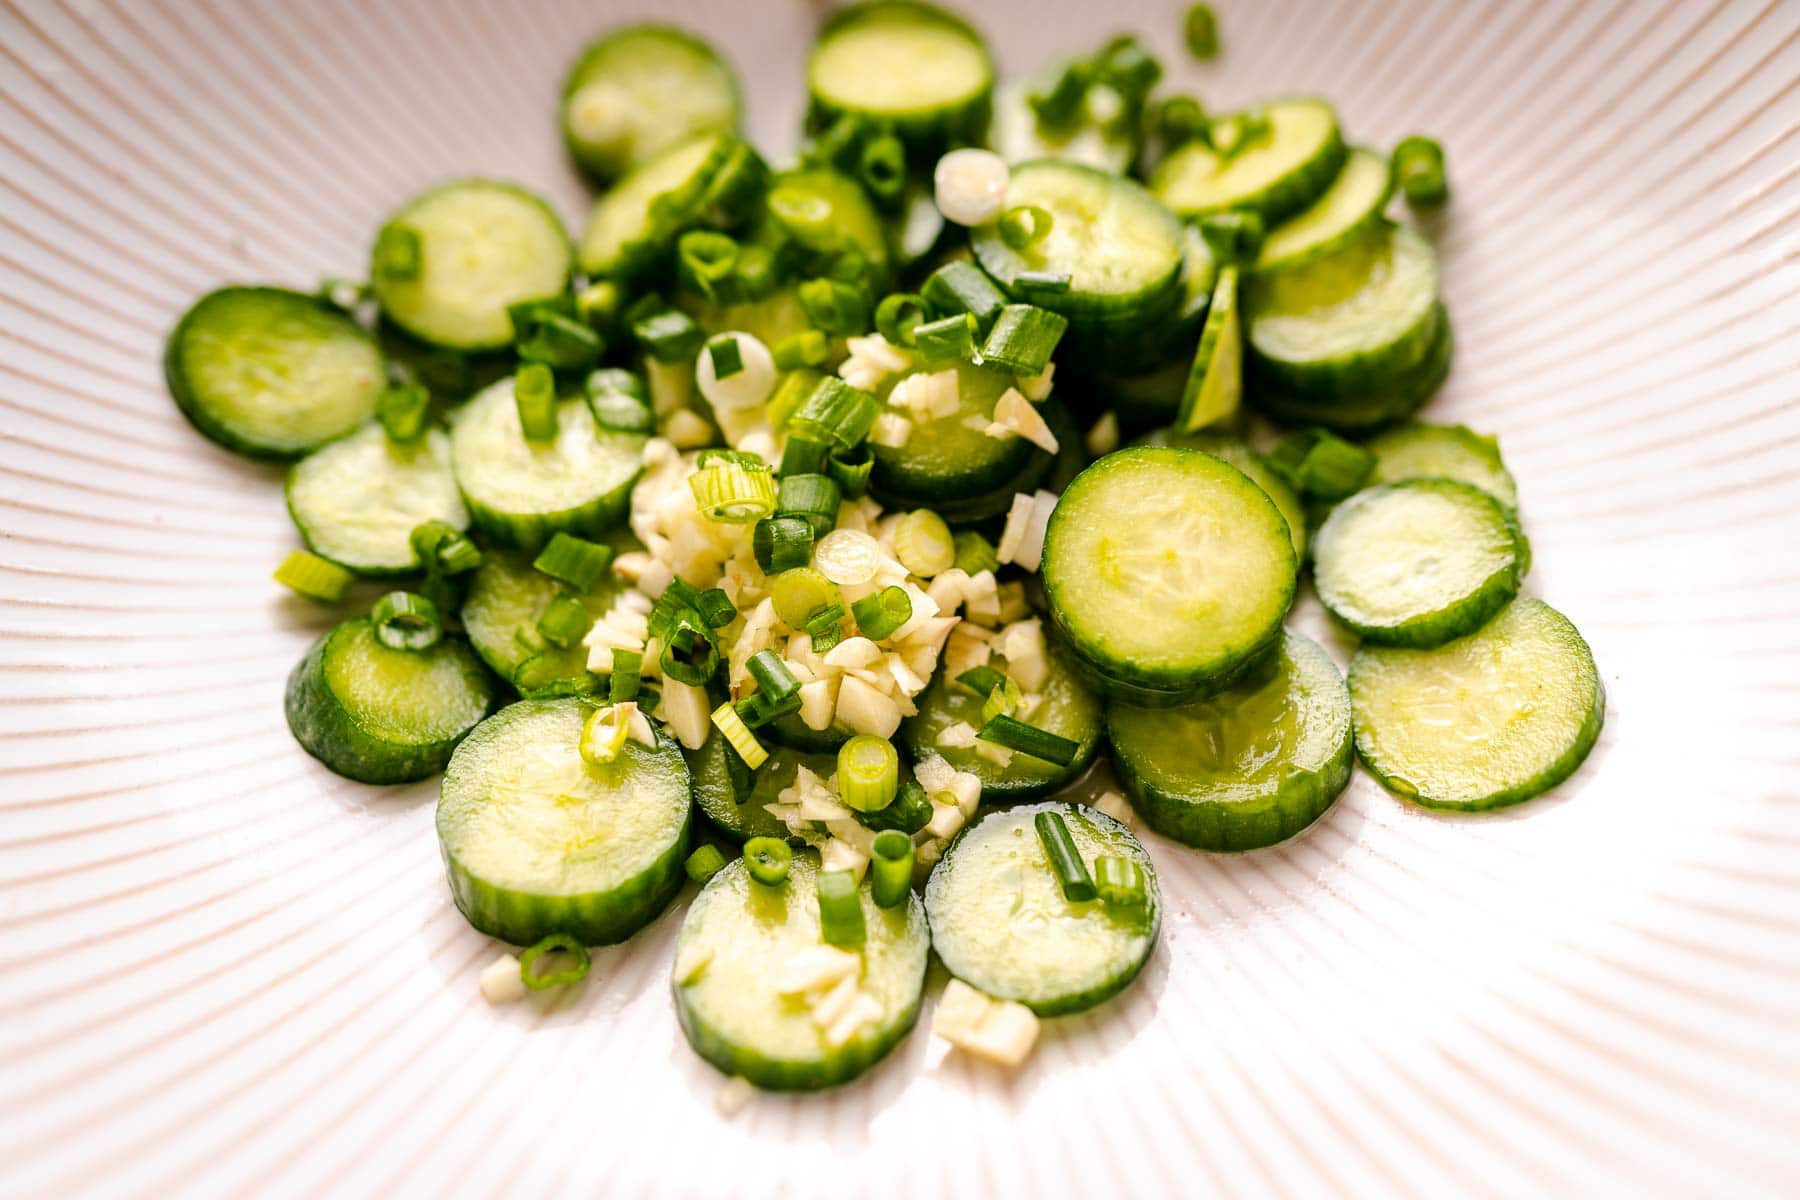 Slices of cucumber in a white bowl with sliced green onions and garlic.